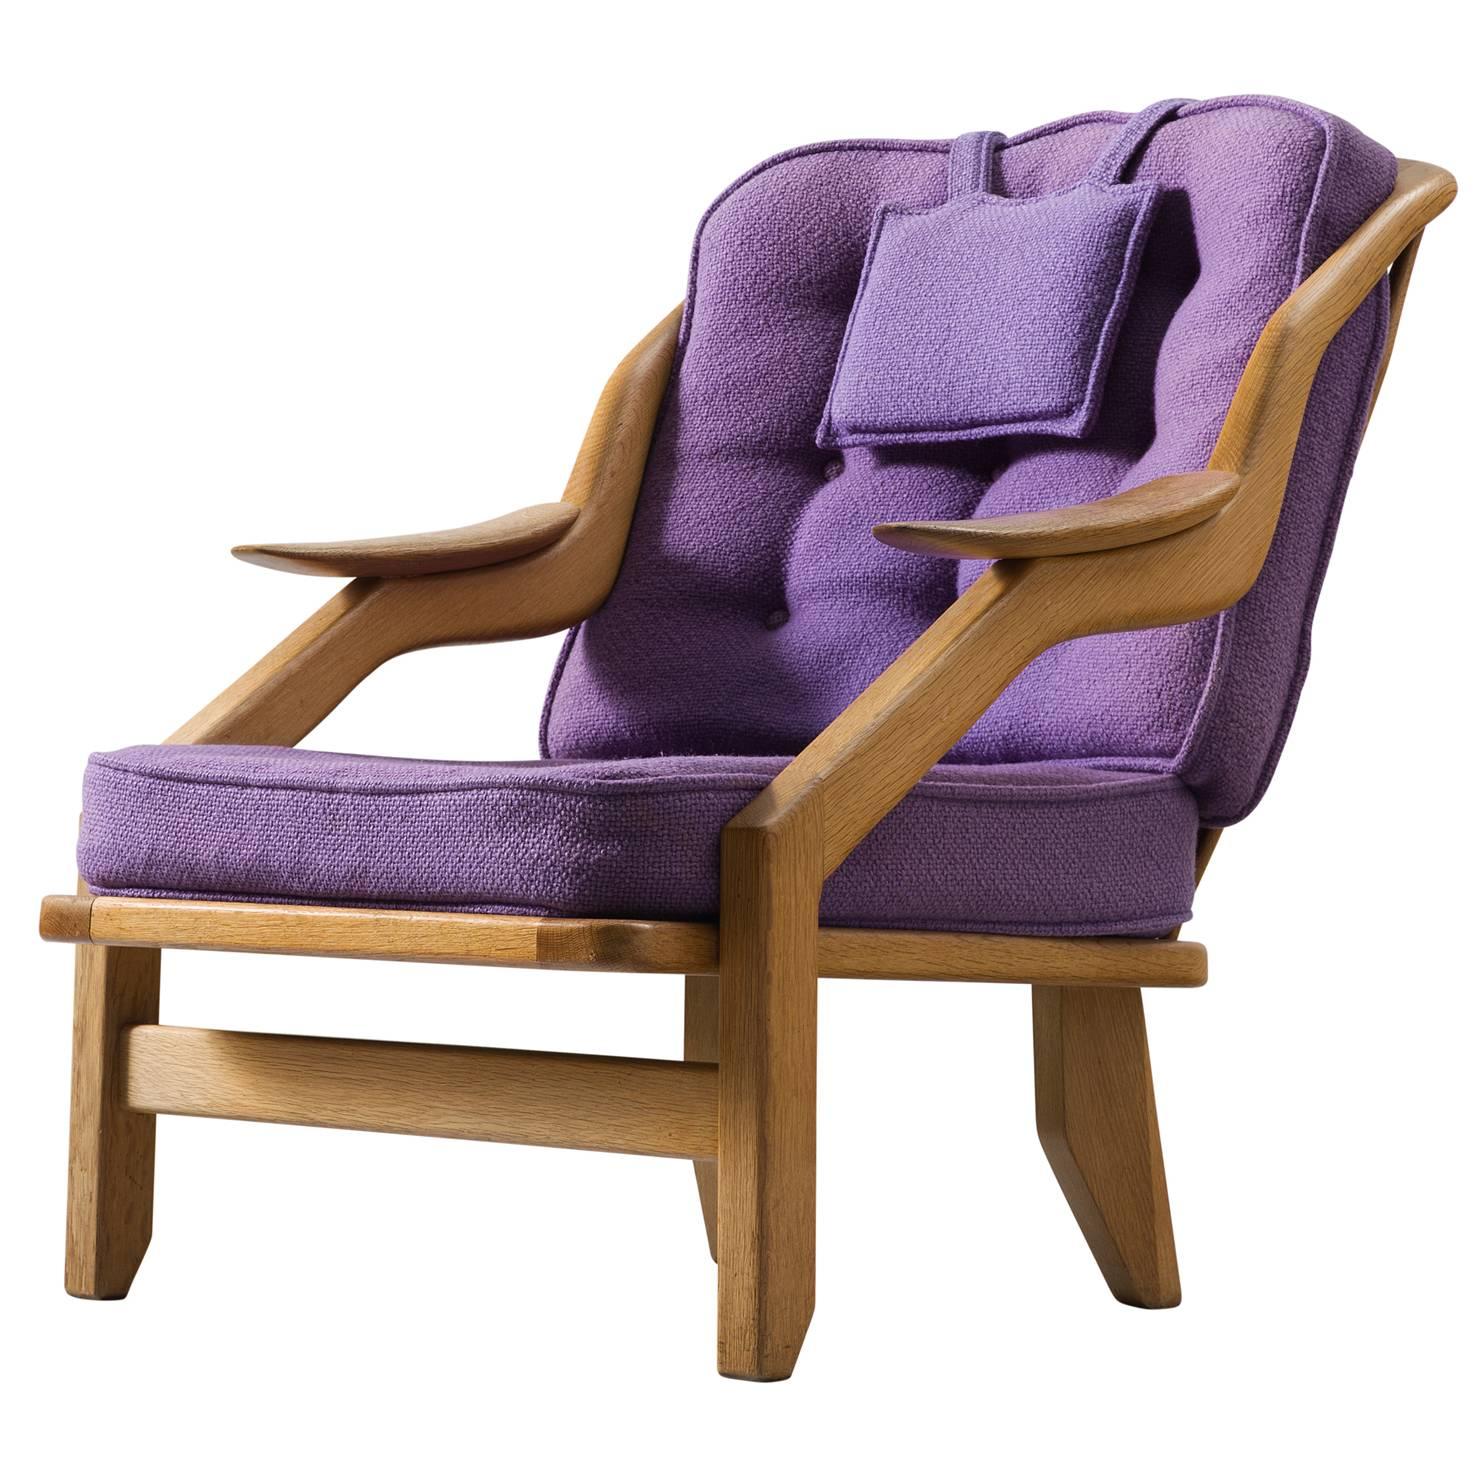 Guillerme & Chambron Lounge Chair in Solid Oak and Purple Upholstery